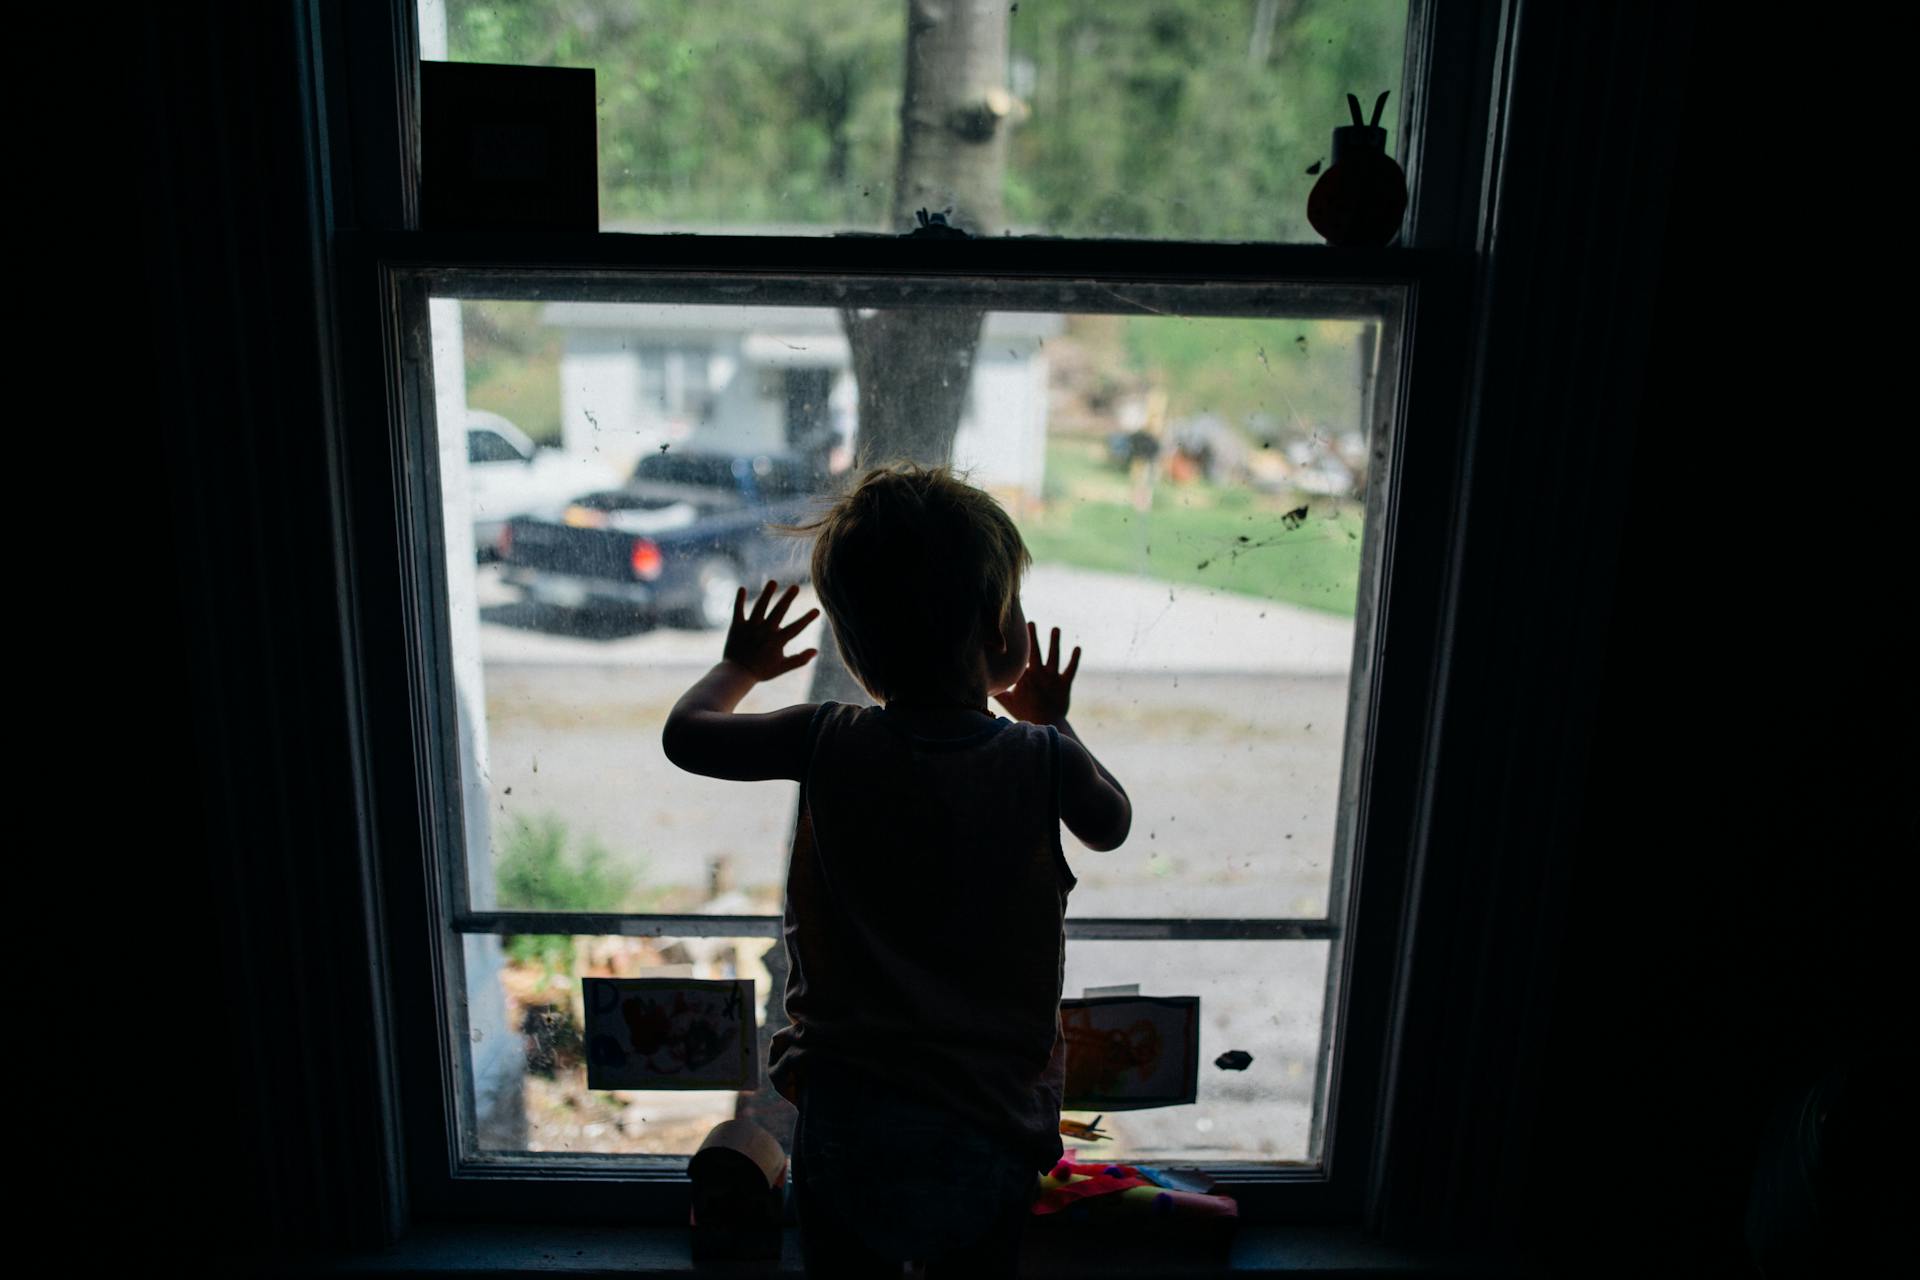 A child looking outside a window | Source: Pexels